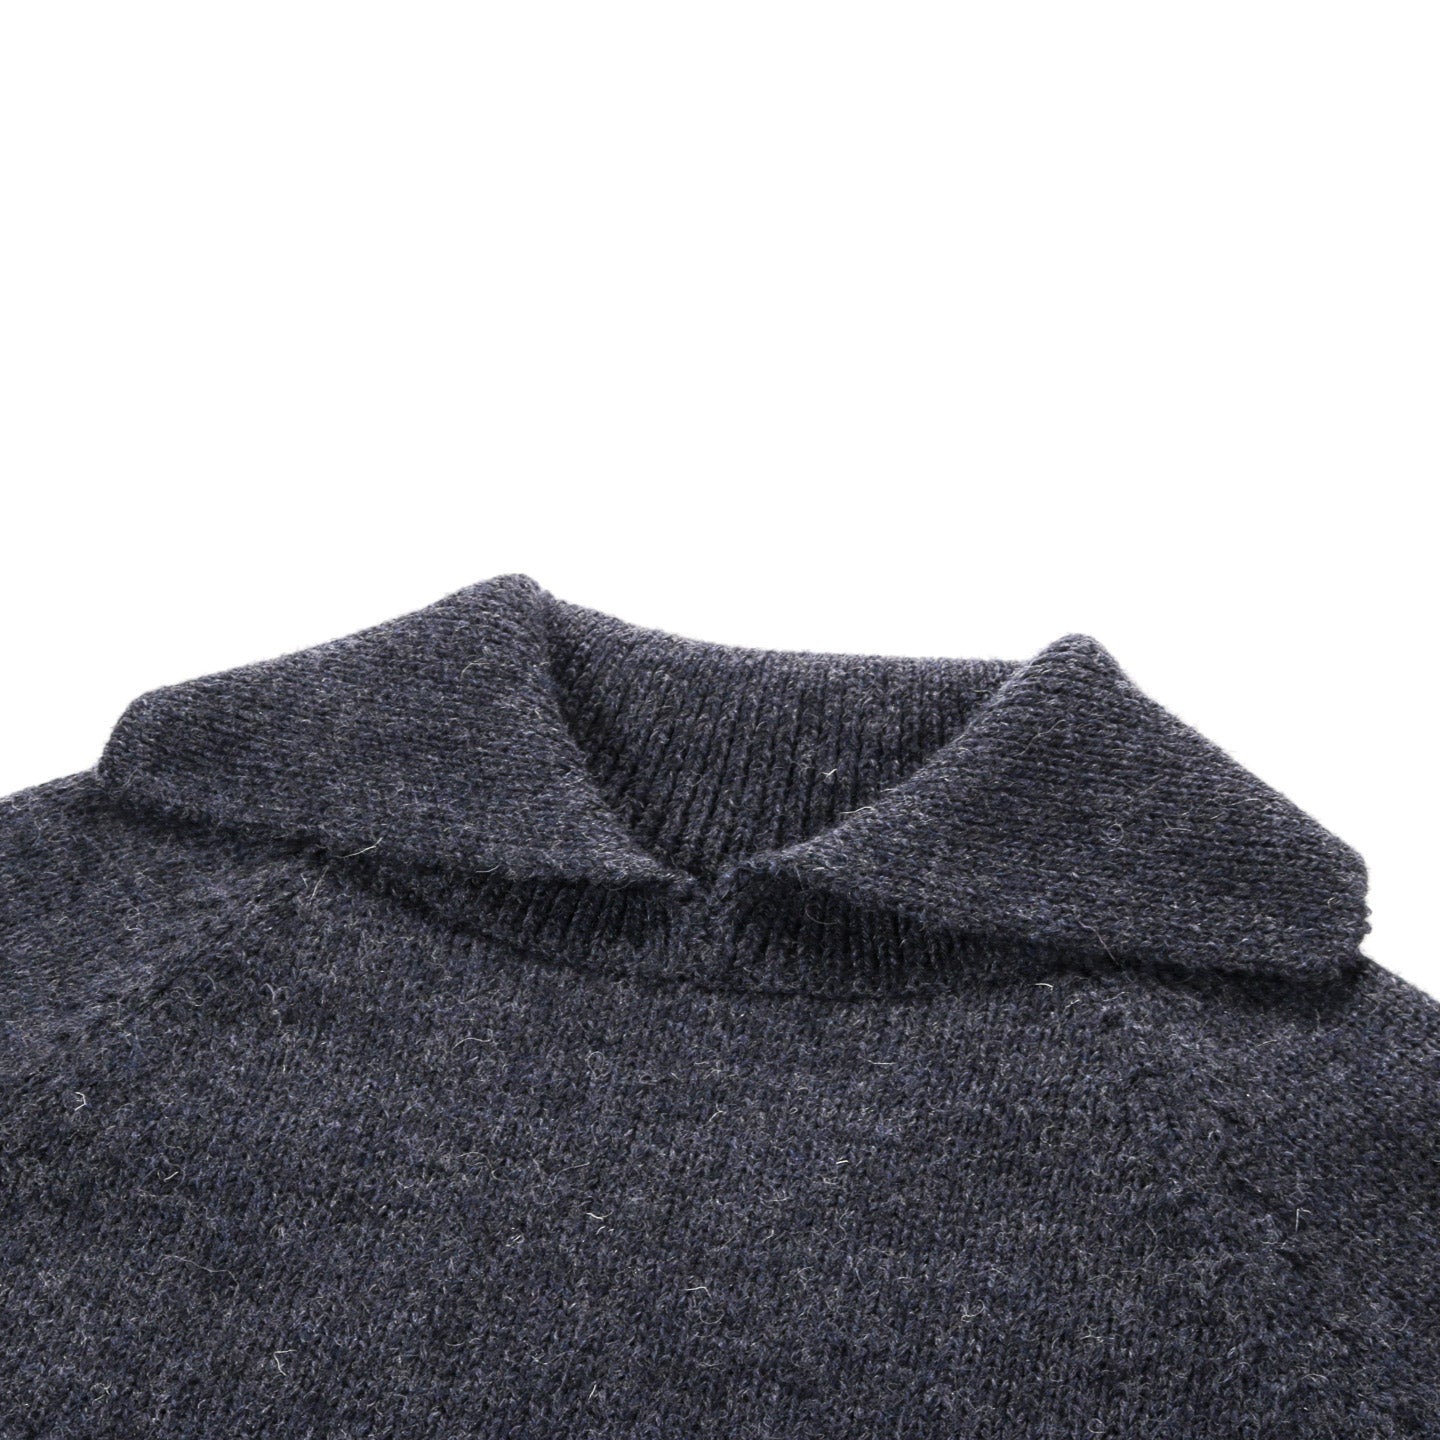 XENIA TELUNTS SAILOR'S NECK SWEATER CHARCOAL